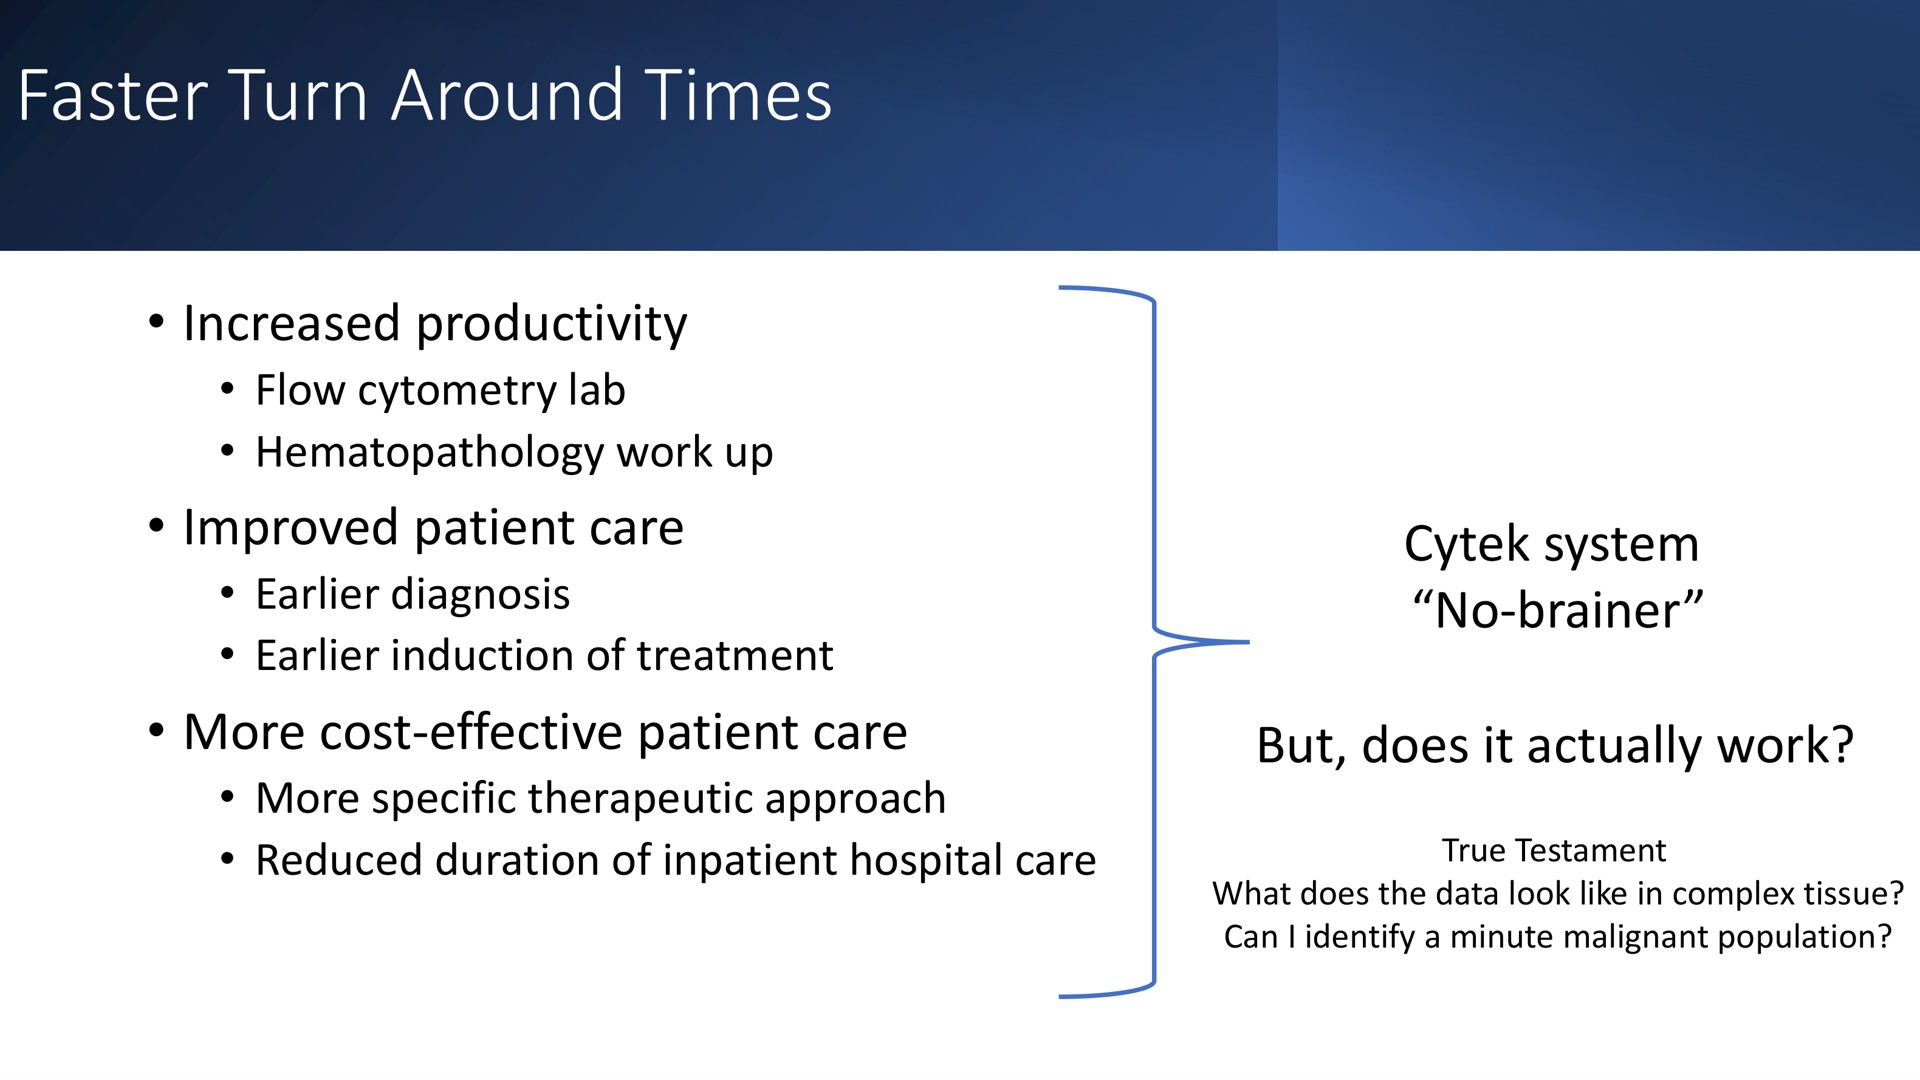 faster turn around times increased productivity improved patient care more cost effective patient care system no brainer but does it actually work diagnosis induction of treatment reduced duration of inpatient hospital true testament | Cytek